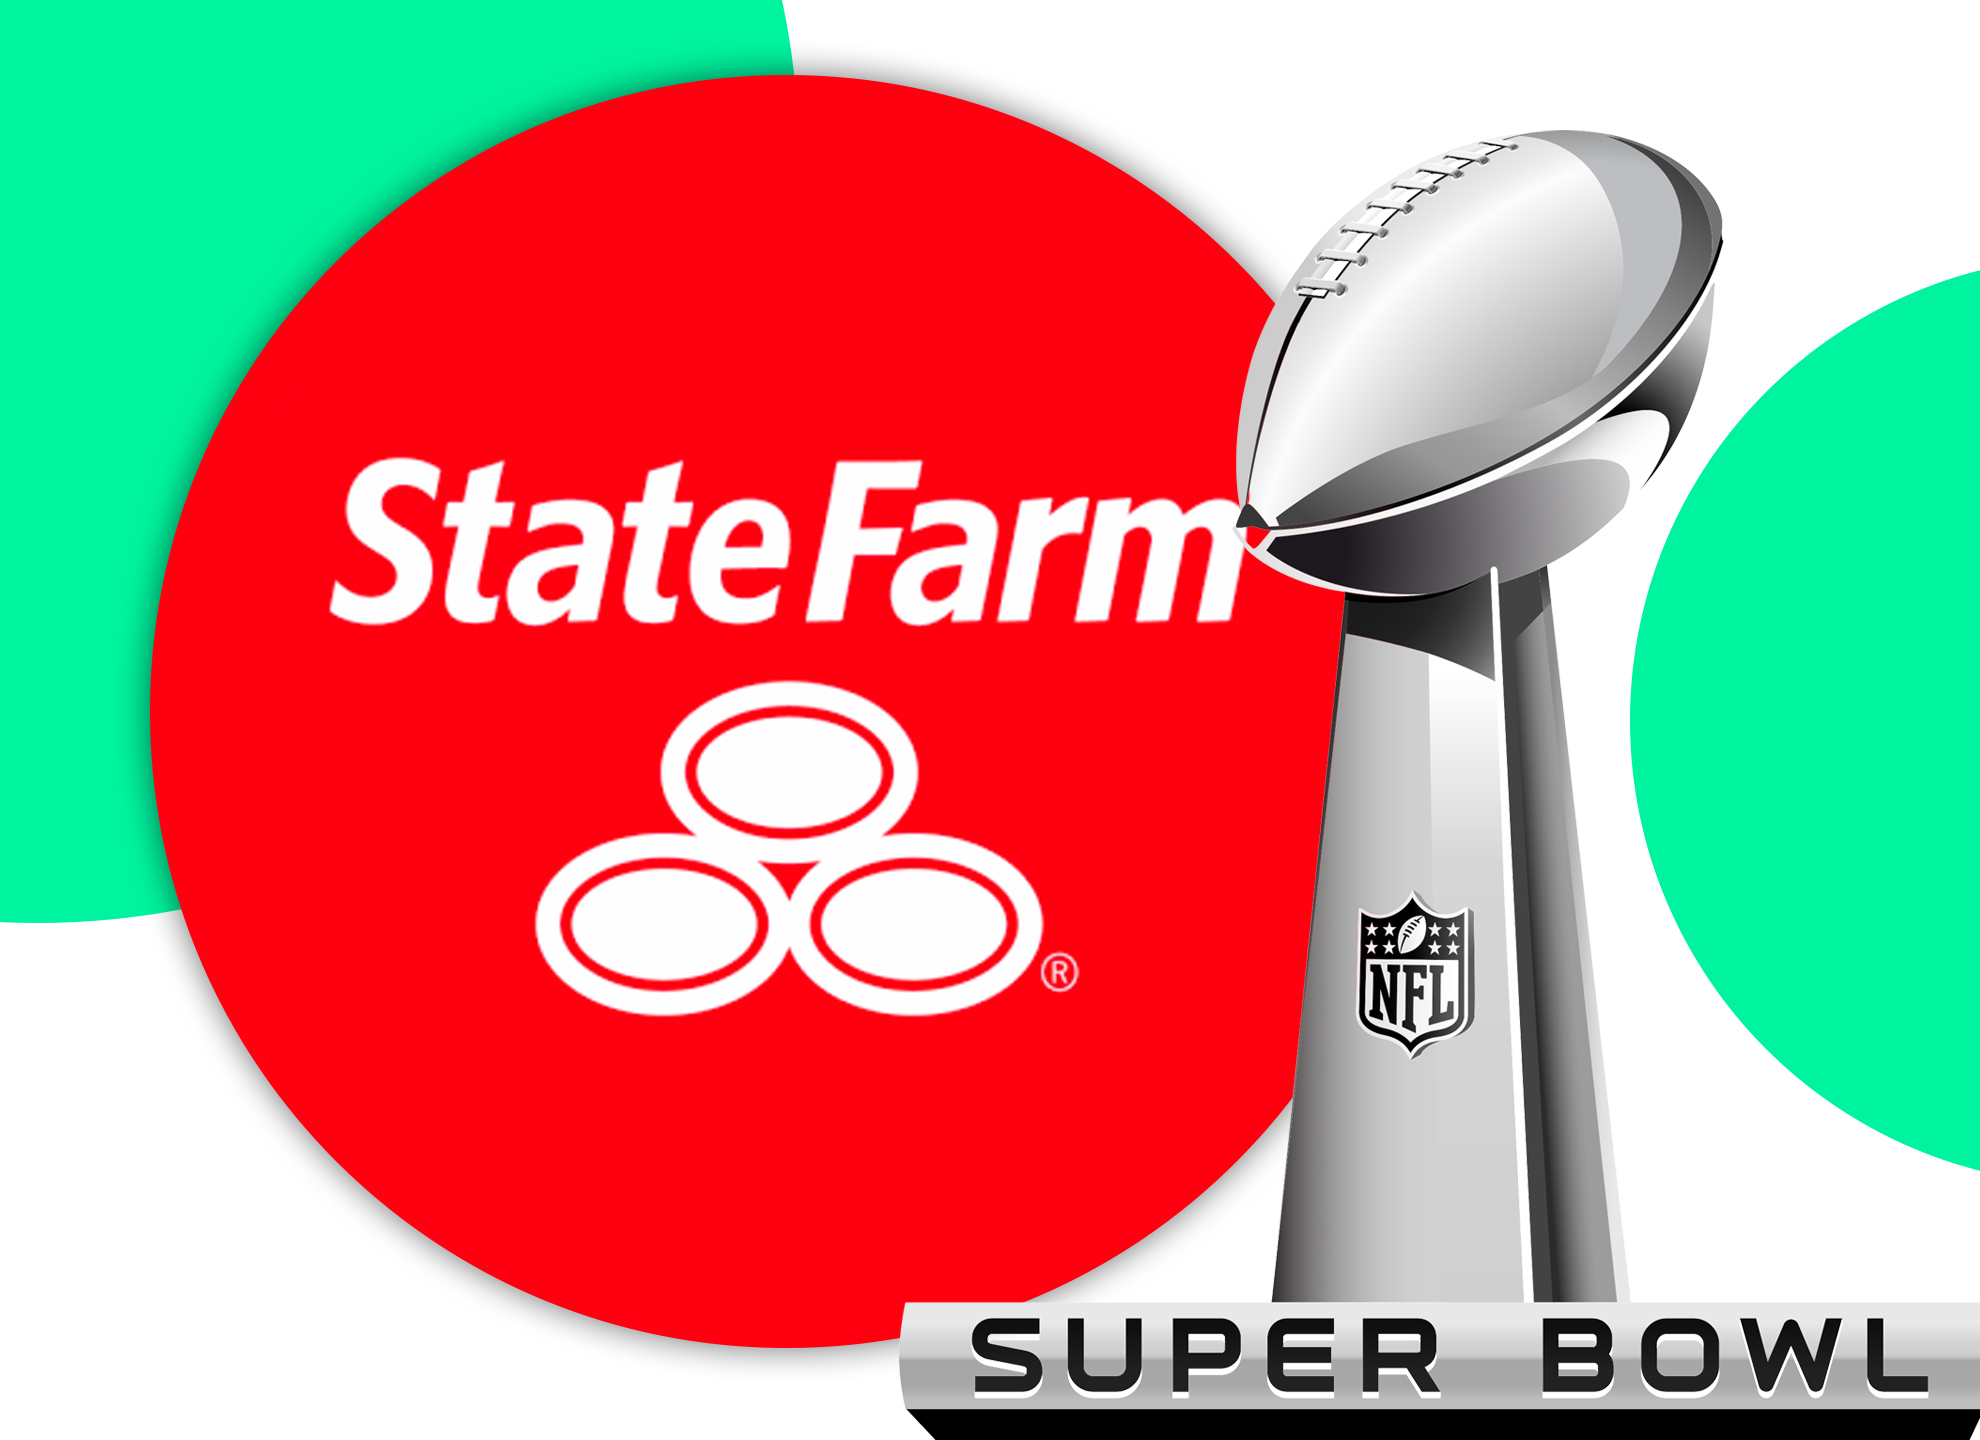 Super Bowl viewership transcends platforms and devices